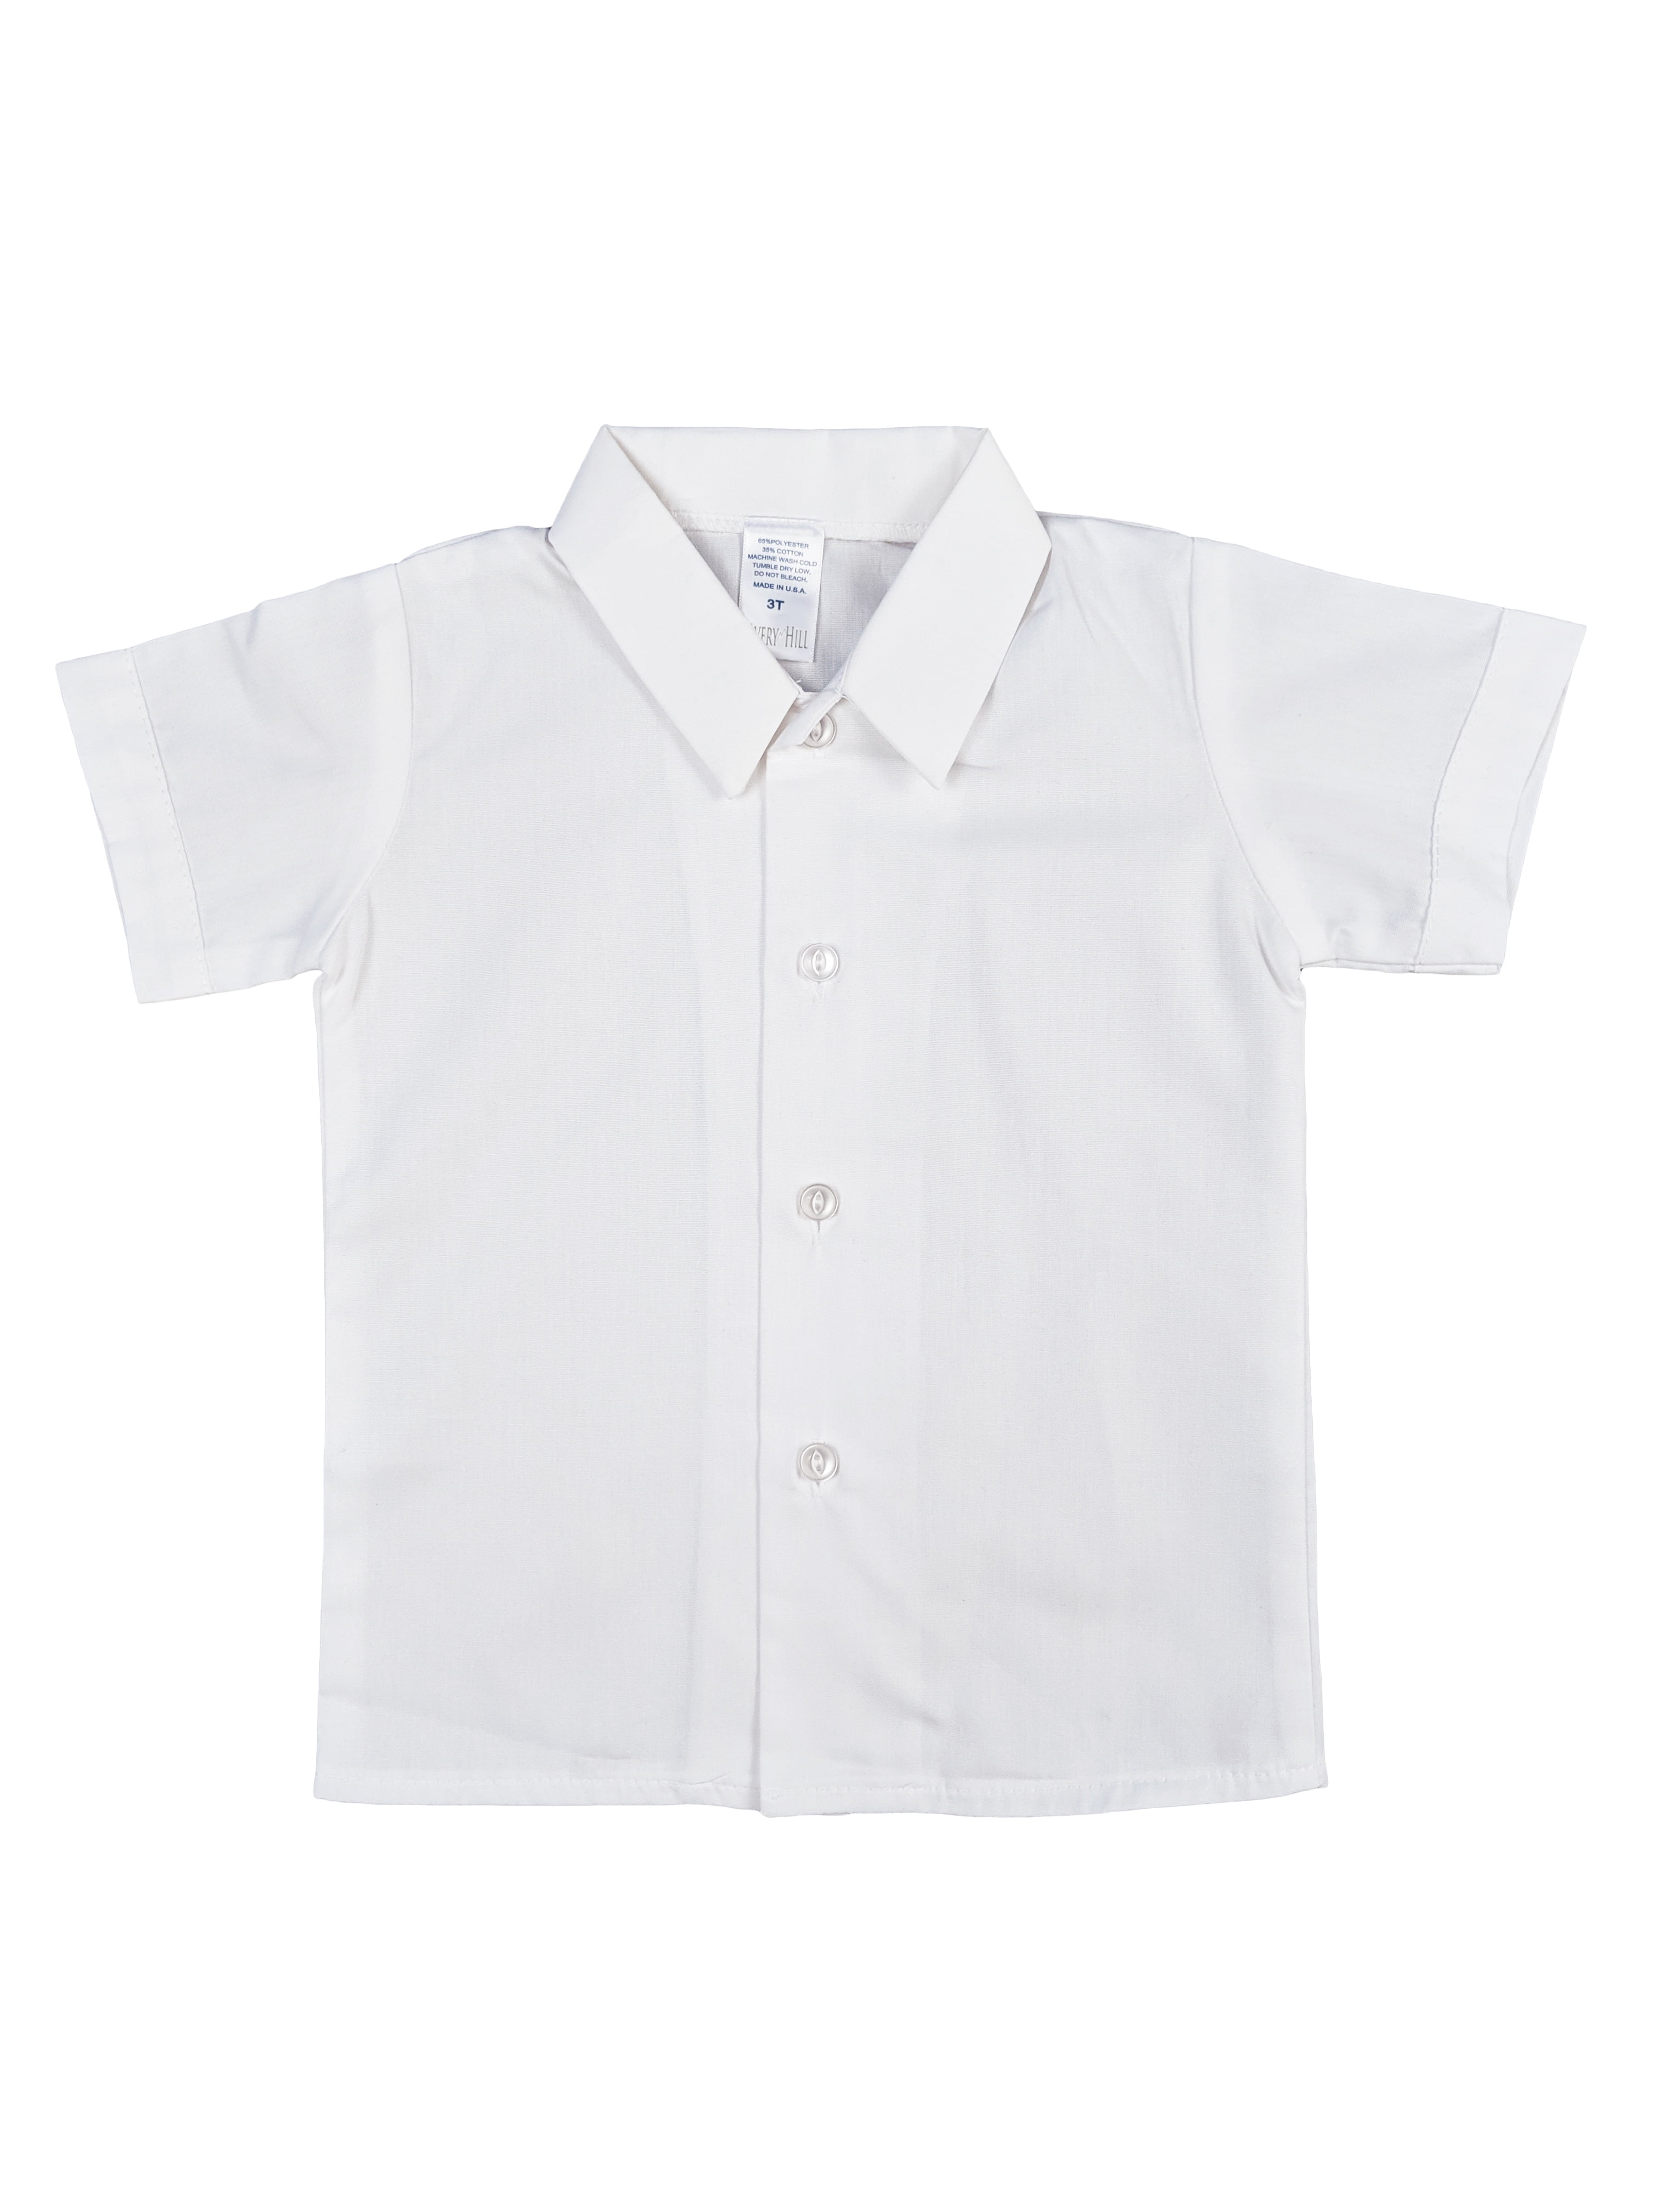 Avery Hill Boys Short Sleeved Simple Dress Shirt in Ivory or White ...